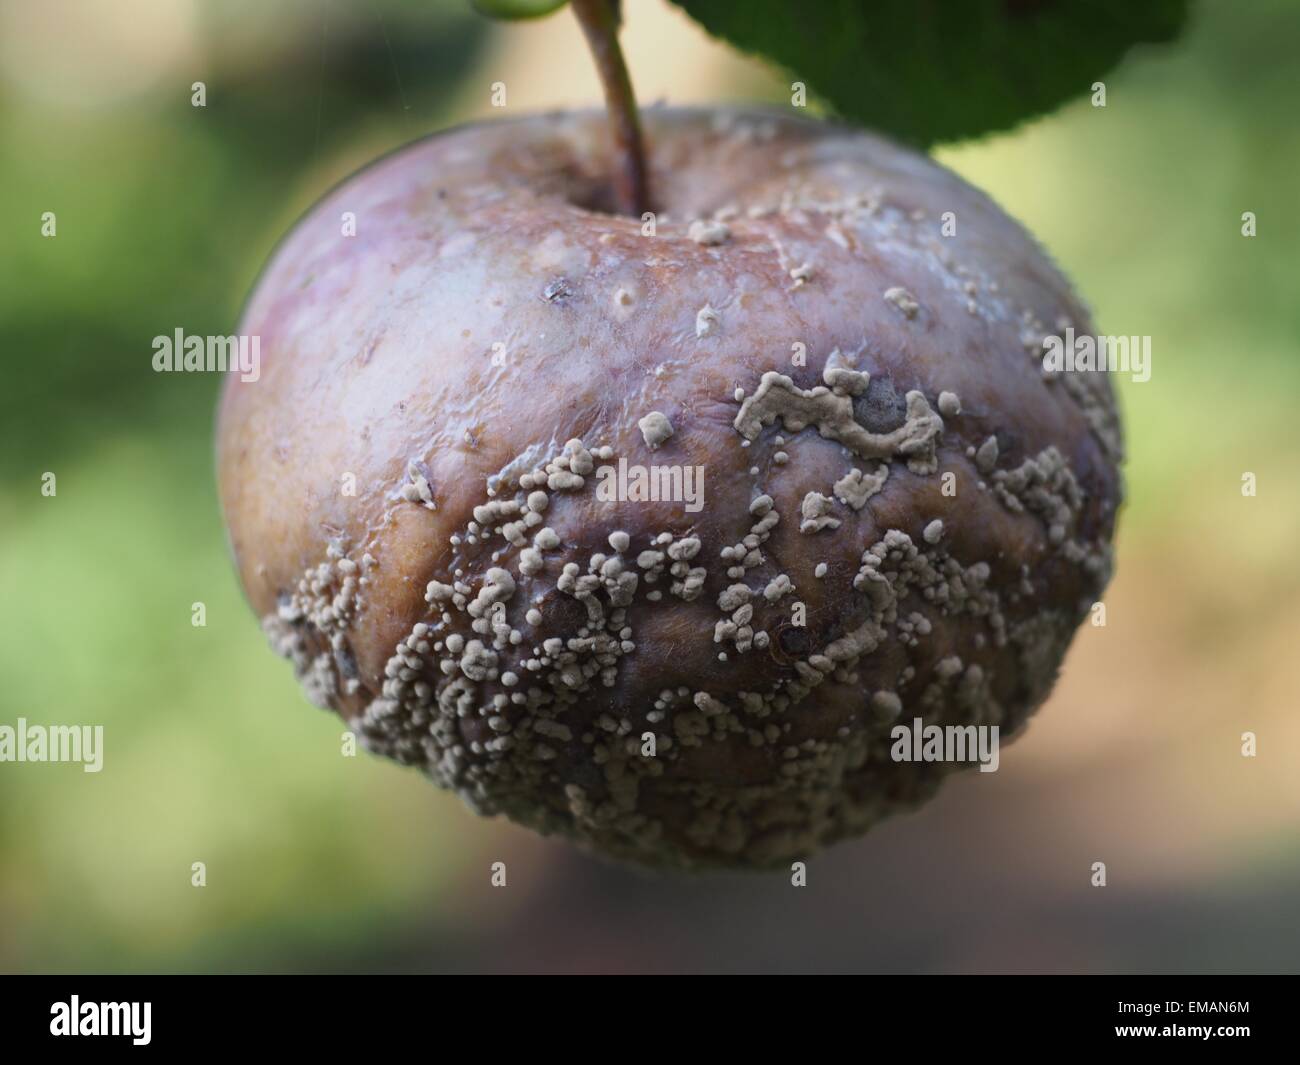 Rotten apple fruit hanging on a tree Banque D'Images